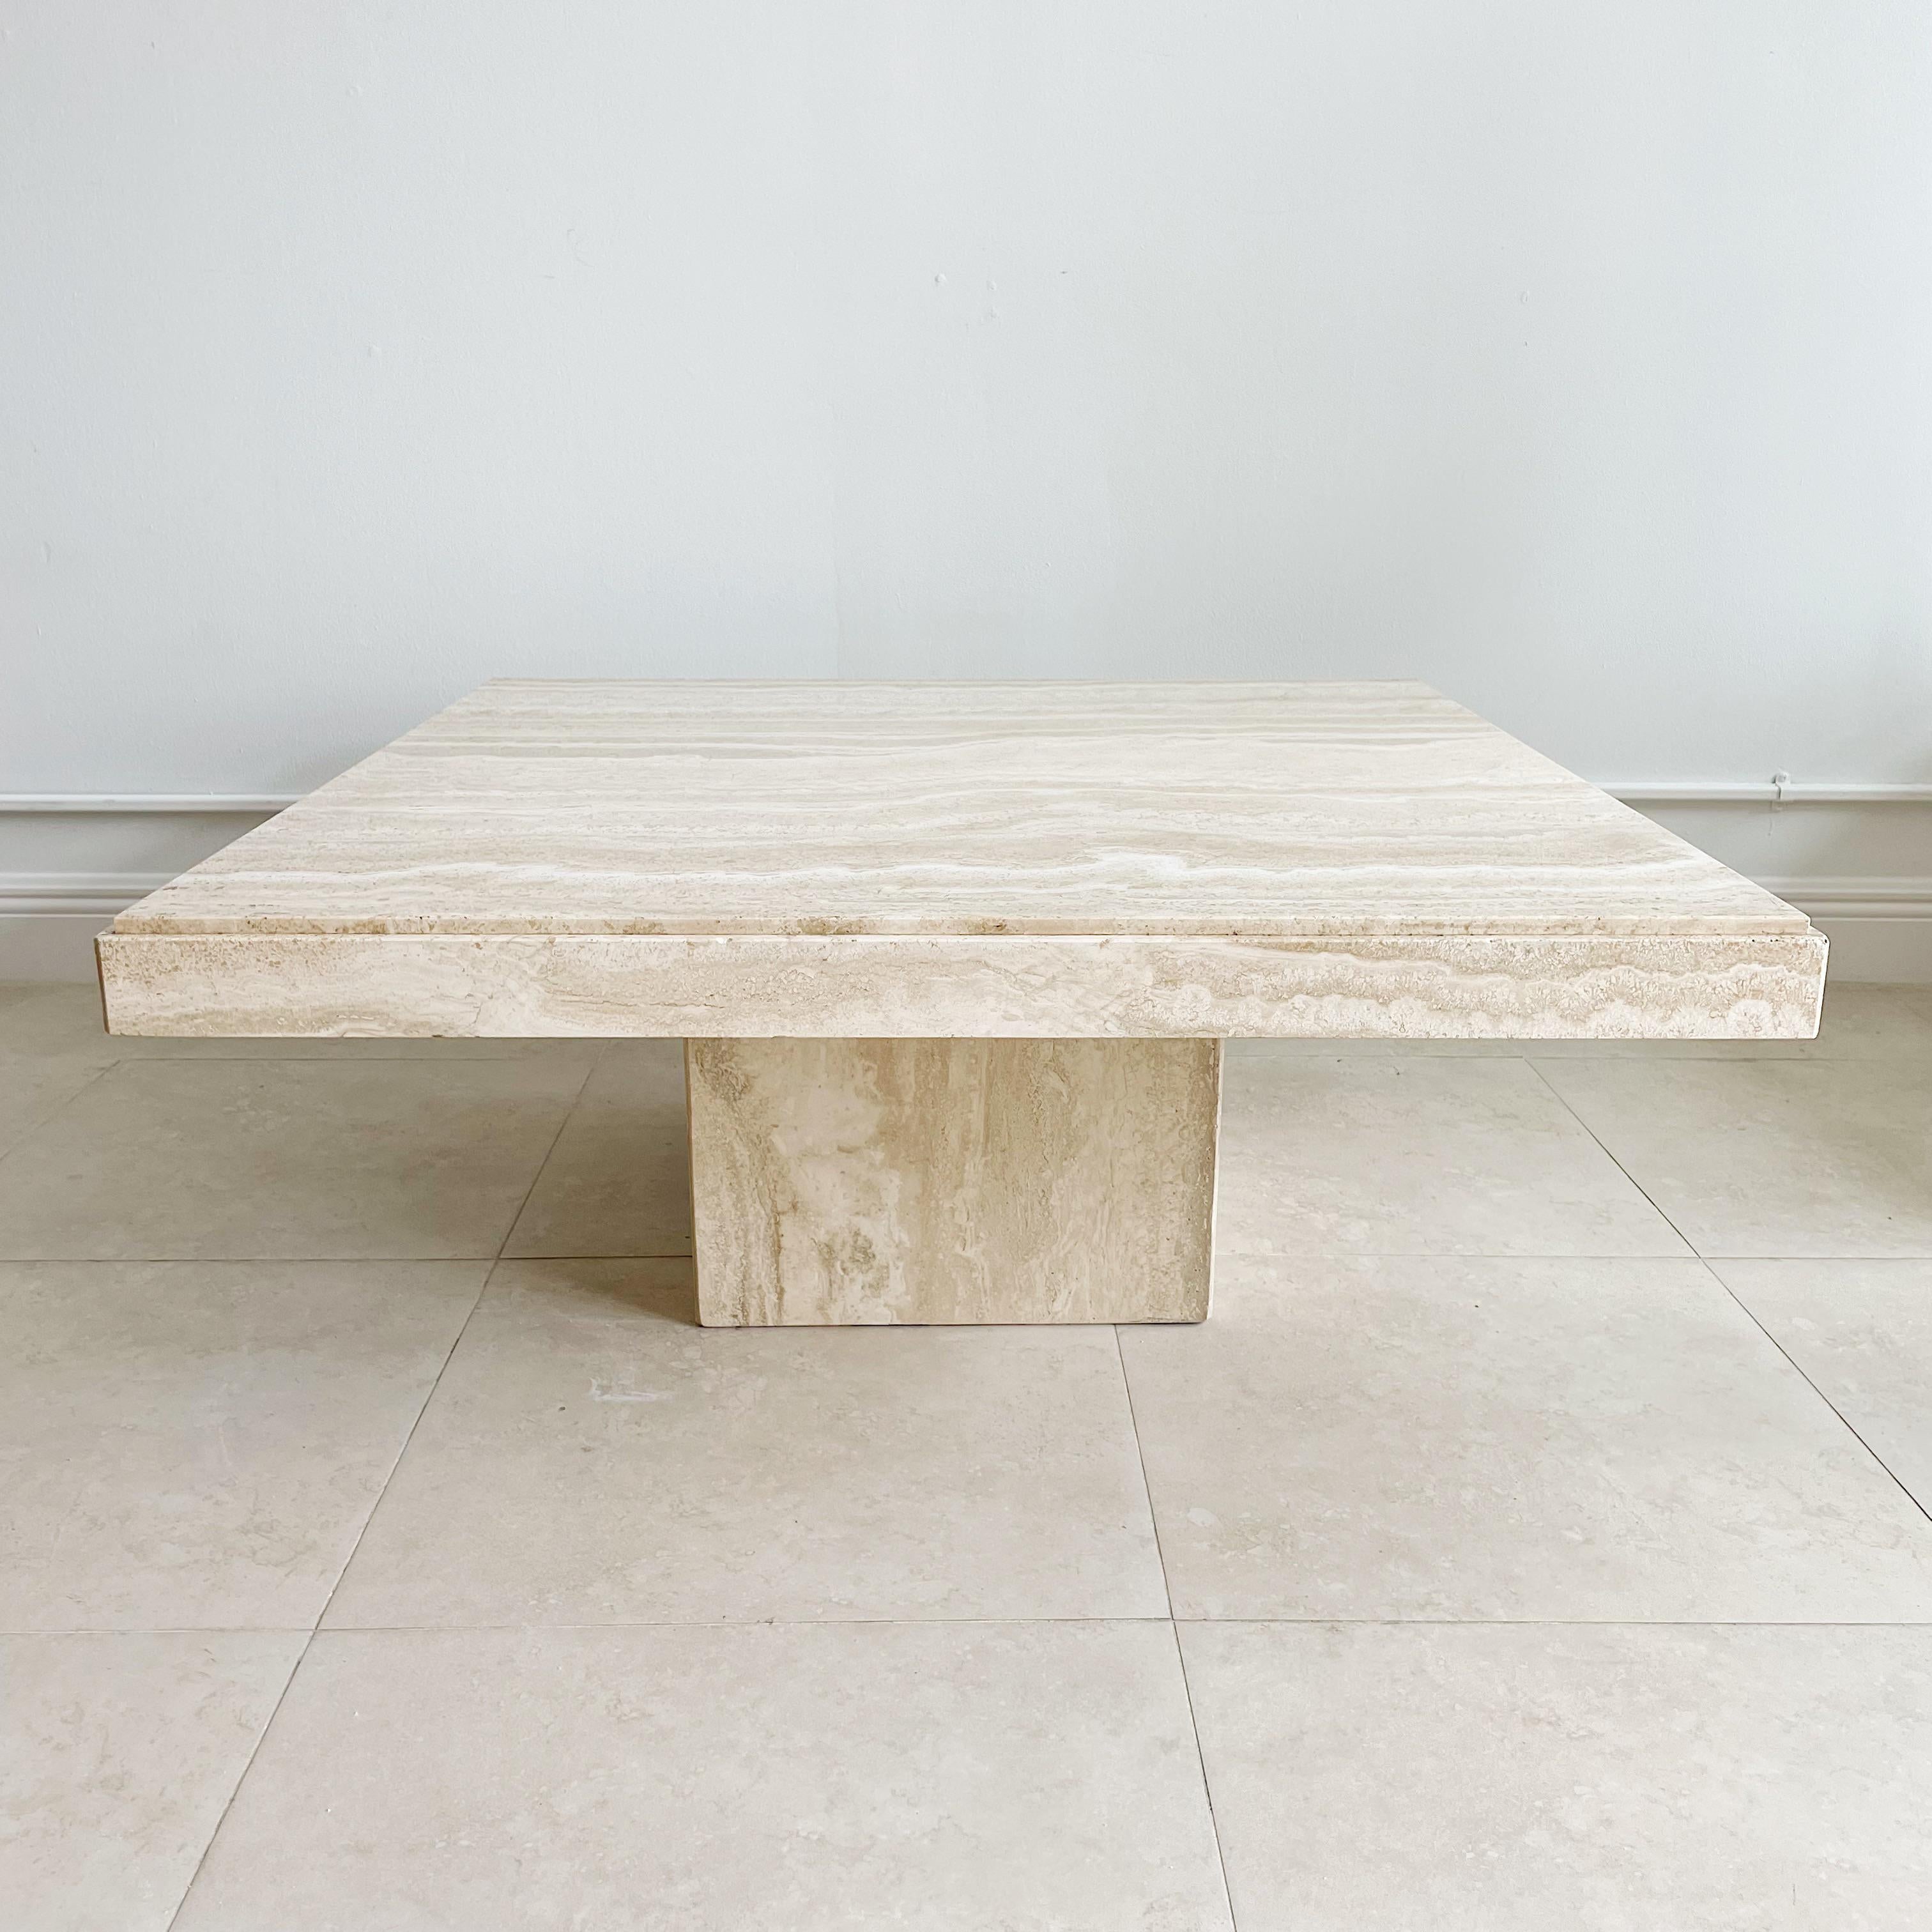 Two piece Italian travertine marble coffee table from the 1970's by Stone International.